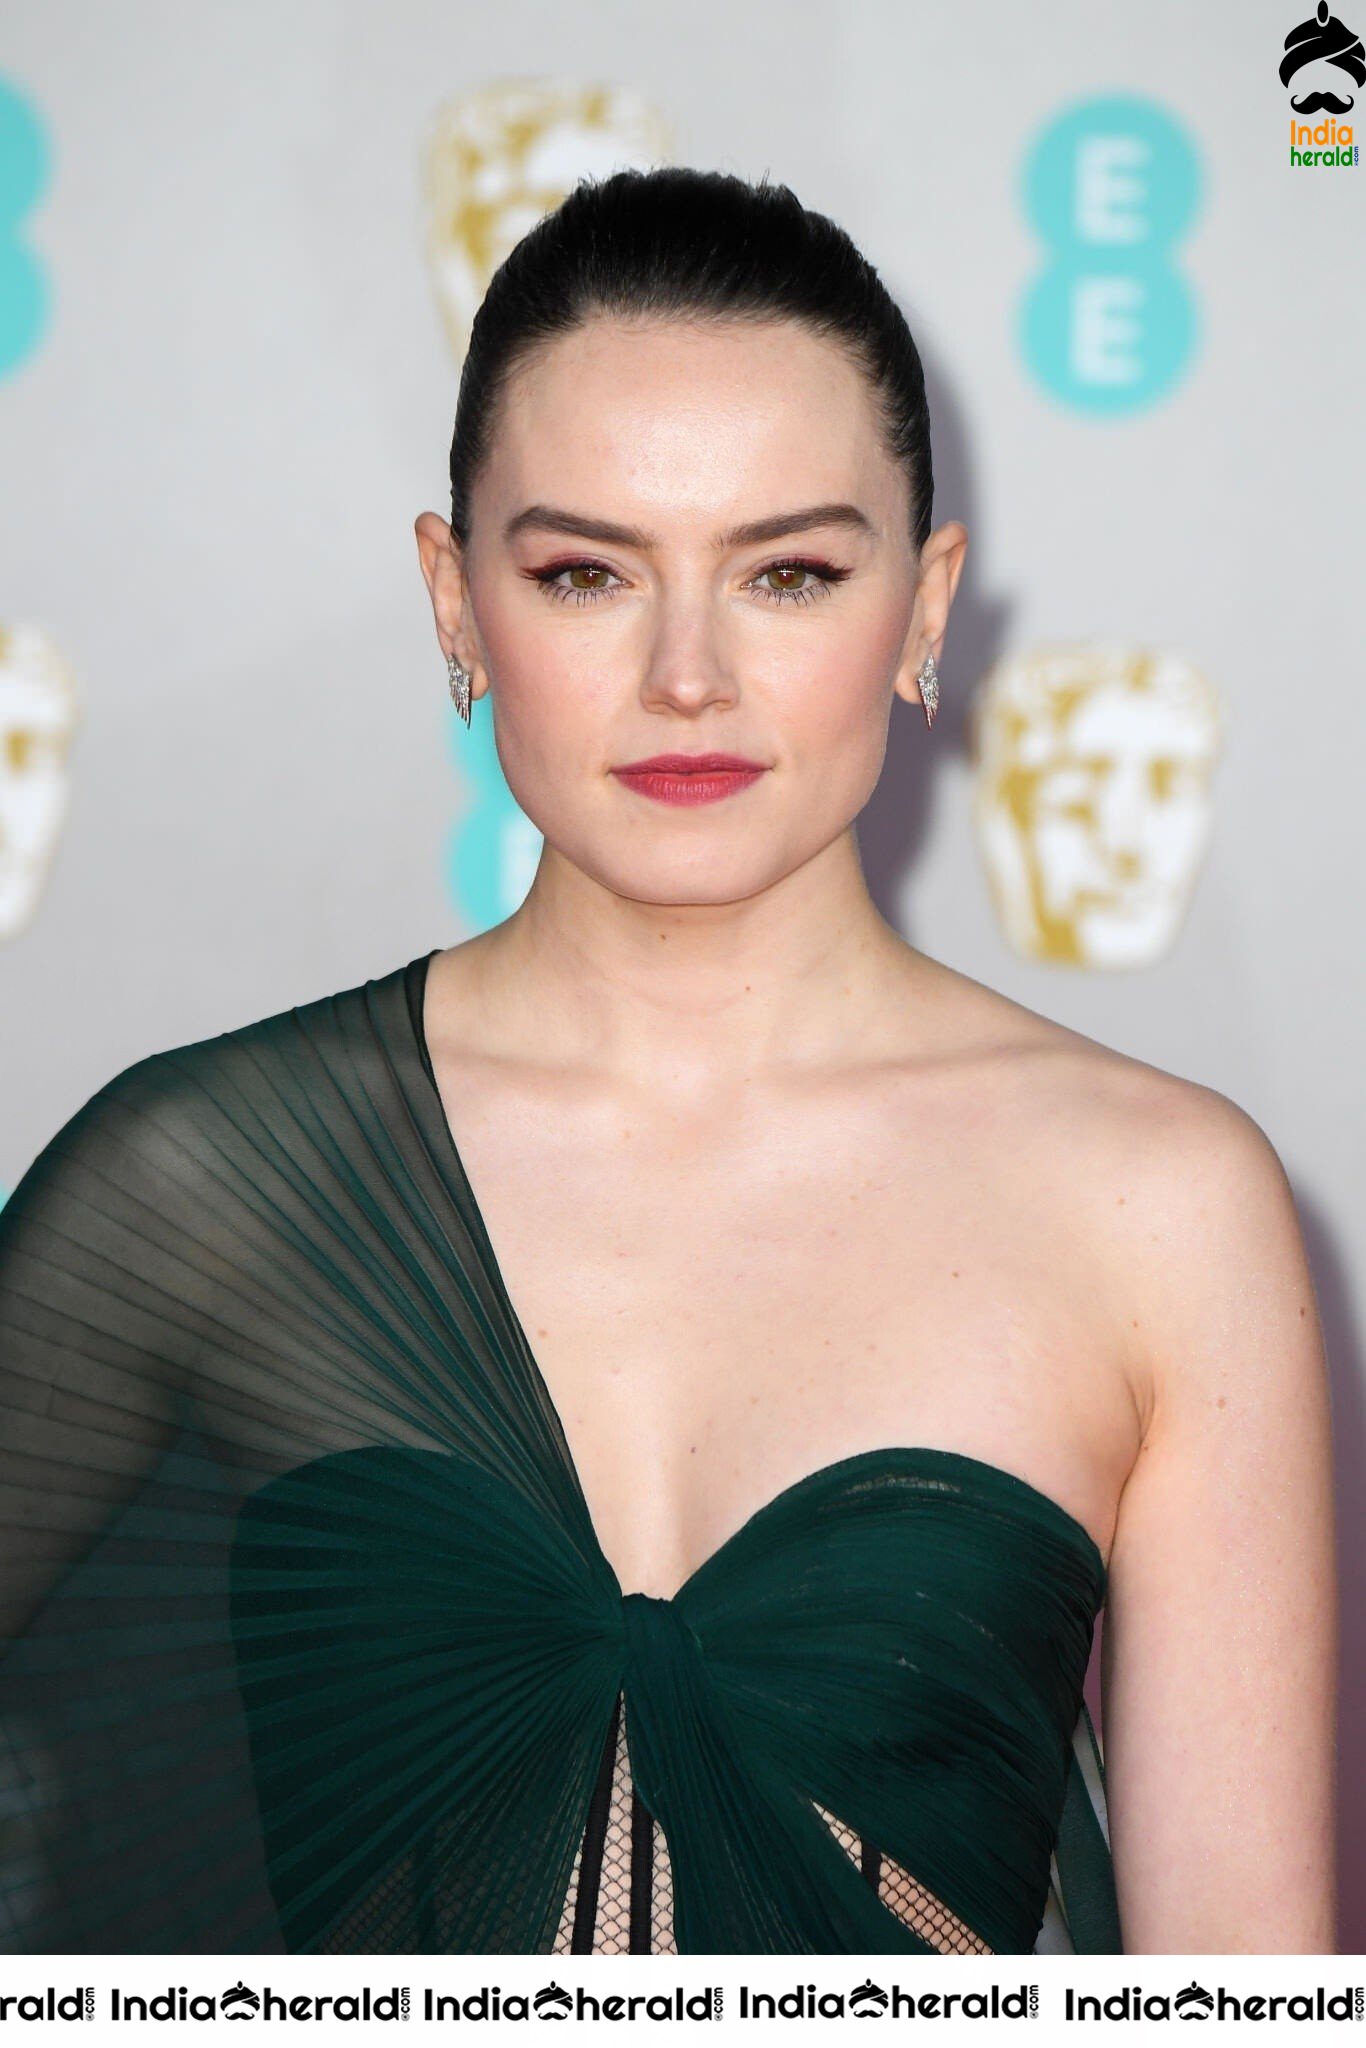 Daisy Ridley at EE British Academy Film Awards in London Set 2